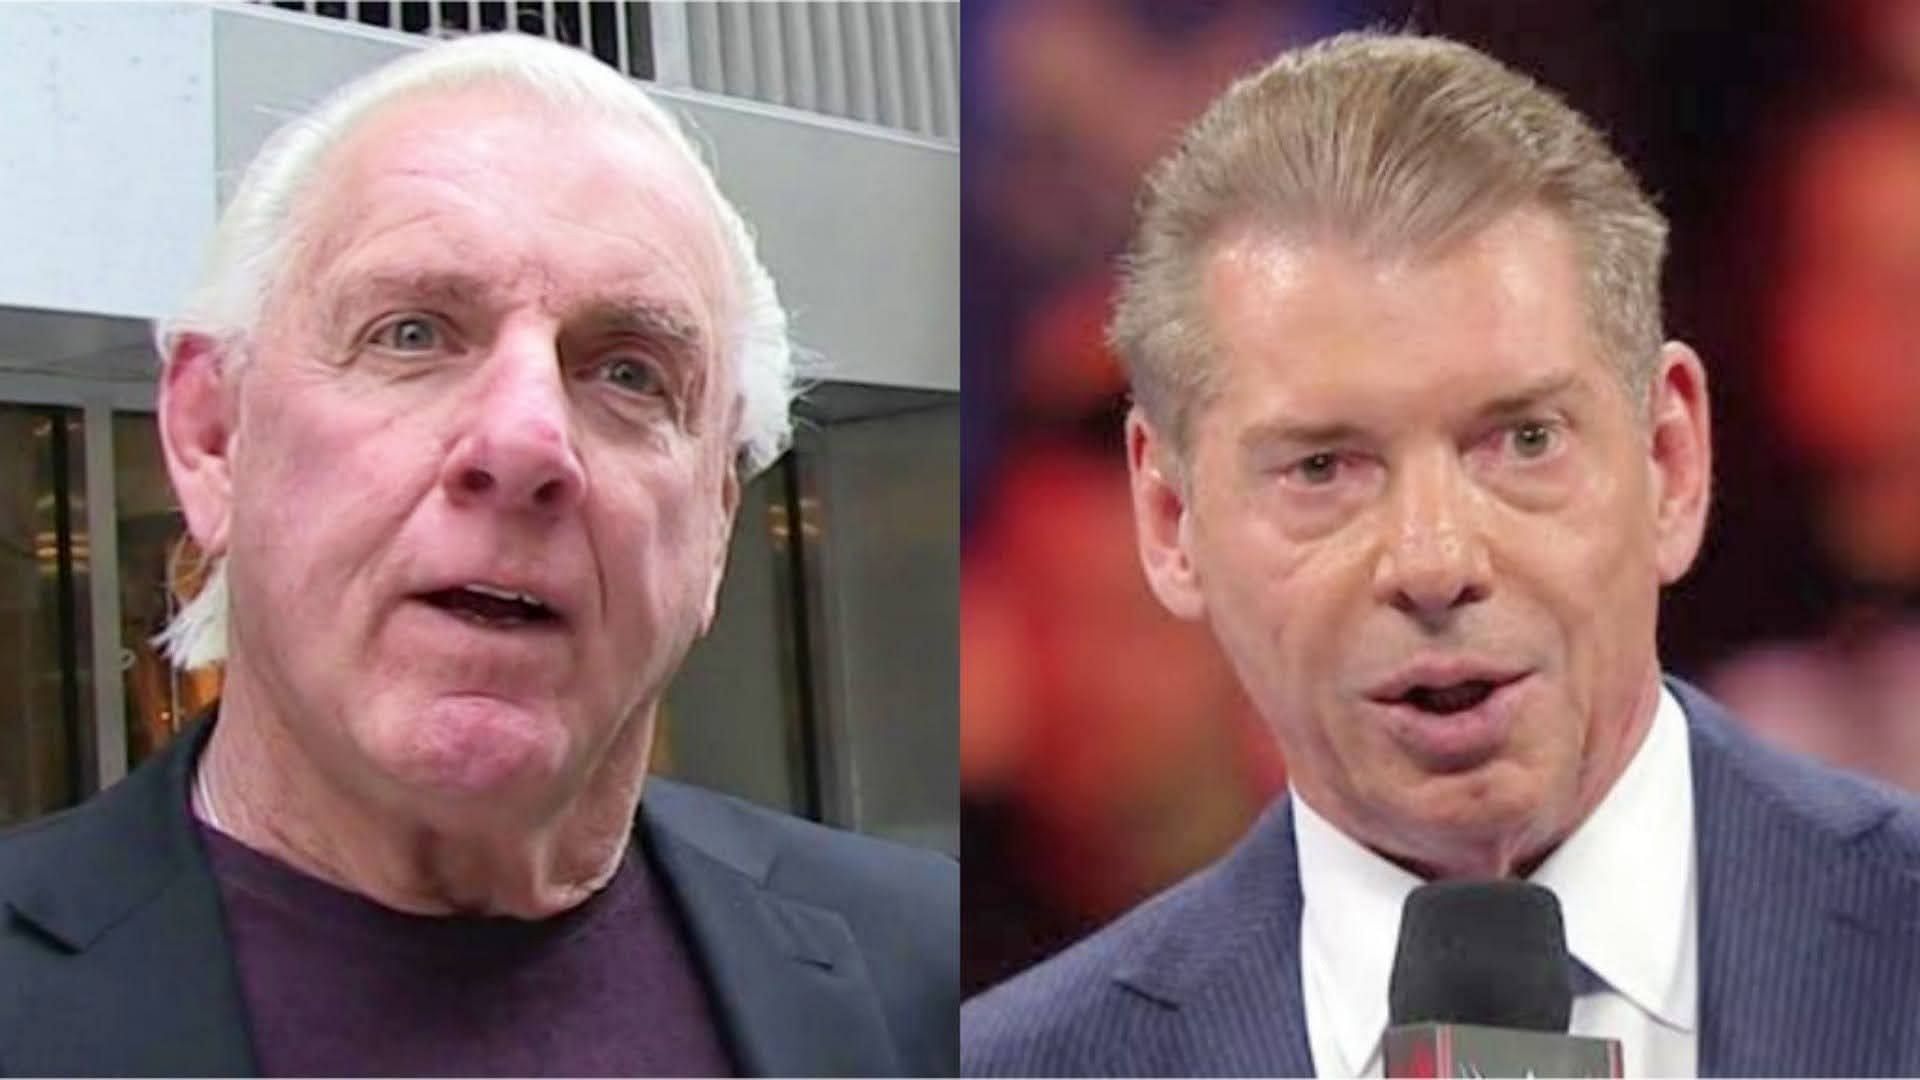 Ric Flair (left) and Vince McMahon (right)